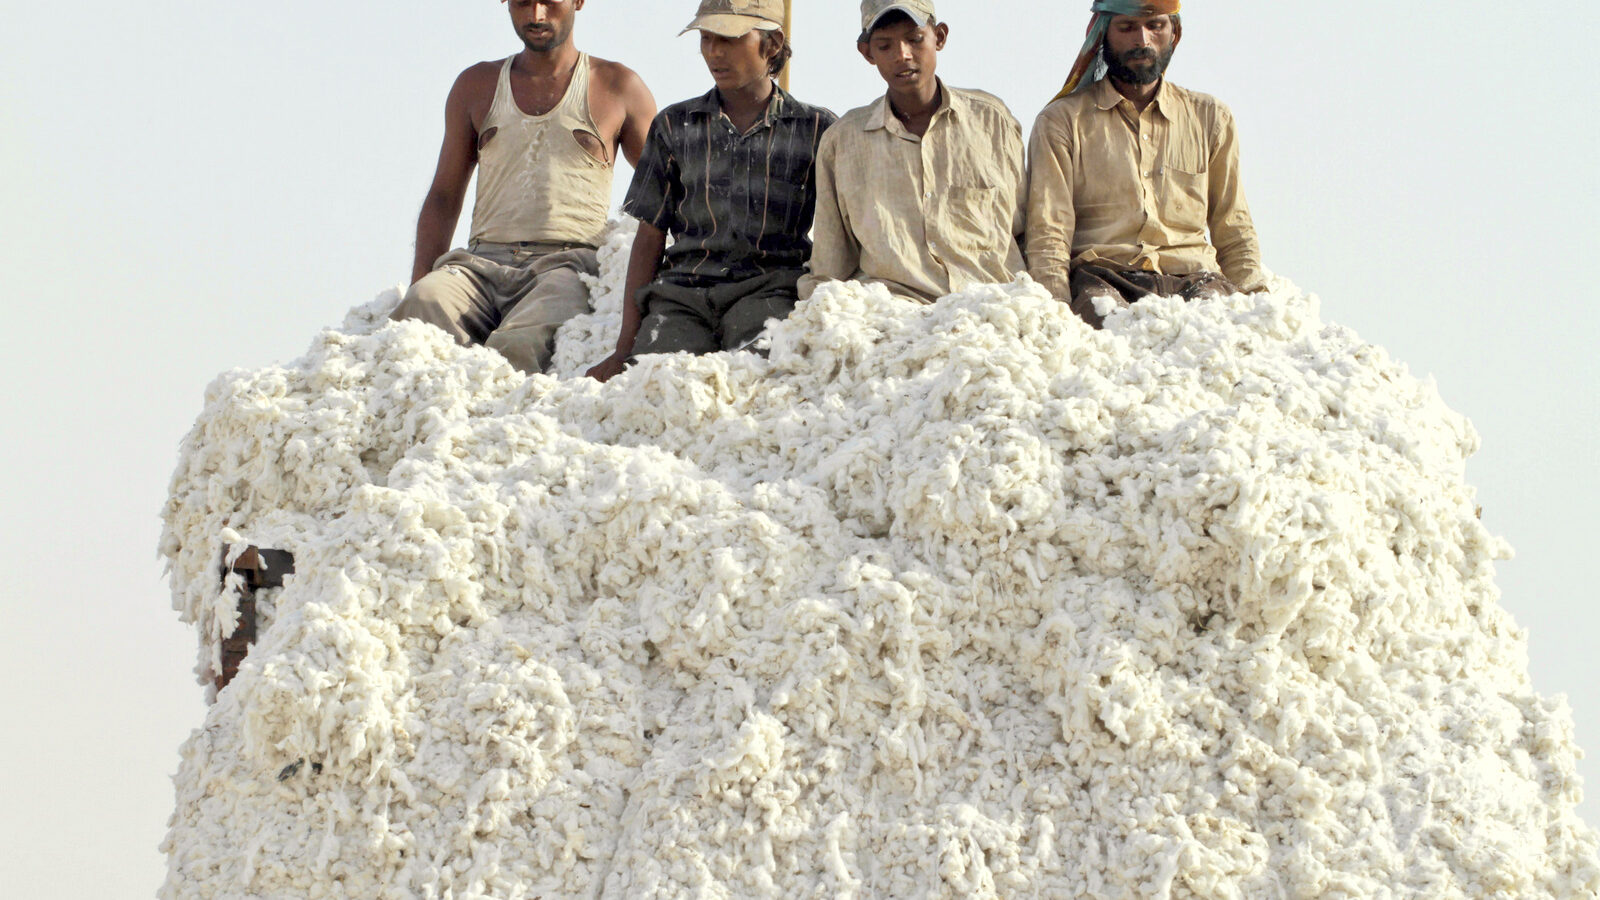 Indian laborers unload cotton from a truck at a cotton mill near Kadi, about 55 kilometers (34 miles) from Ahmadabad, India. U.S. seed giant Monsanto has threatened to pull its genetically modified crop technology from India if the government goes ahead with its plan to cut the company's royalty fees. (AP Photo/Ajit Solanki, file)